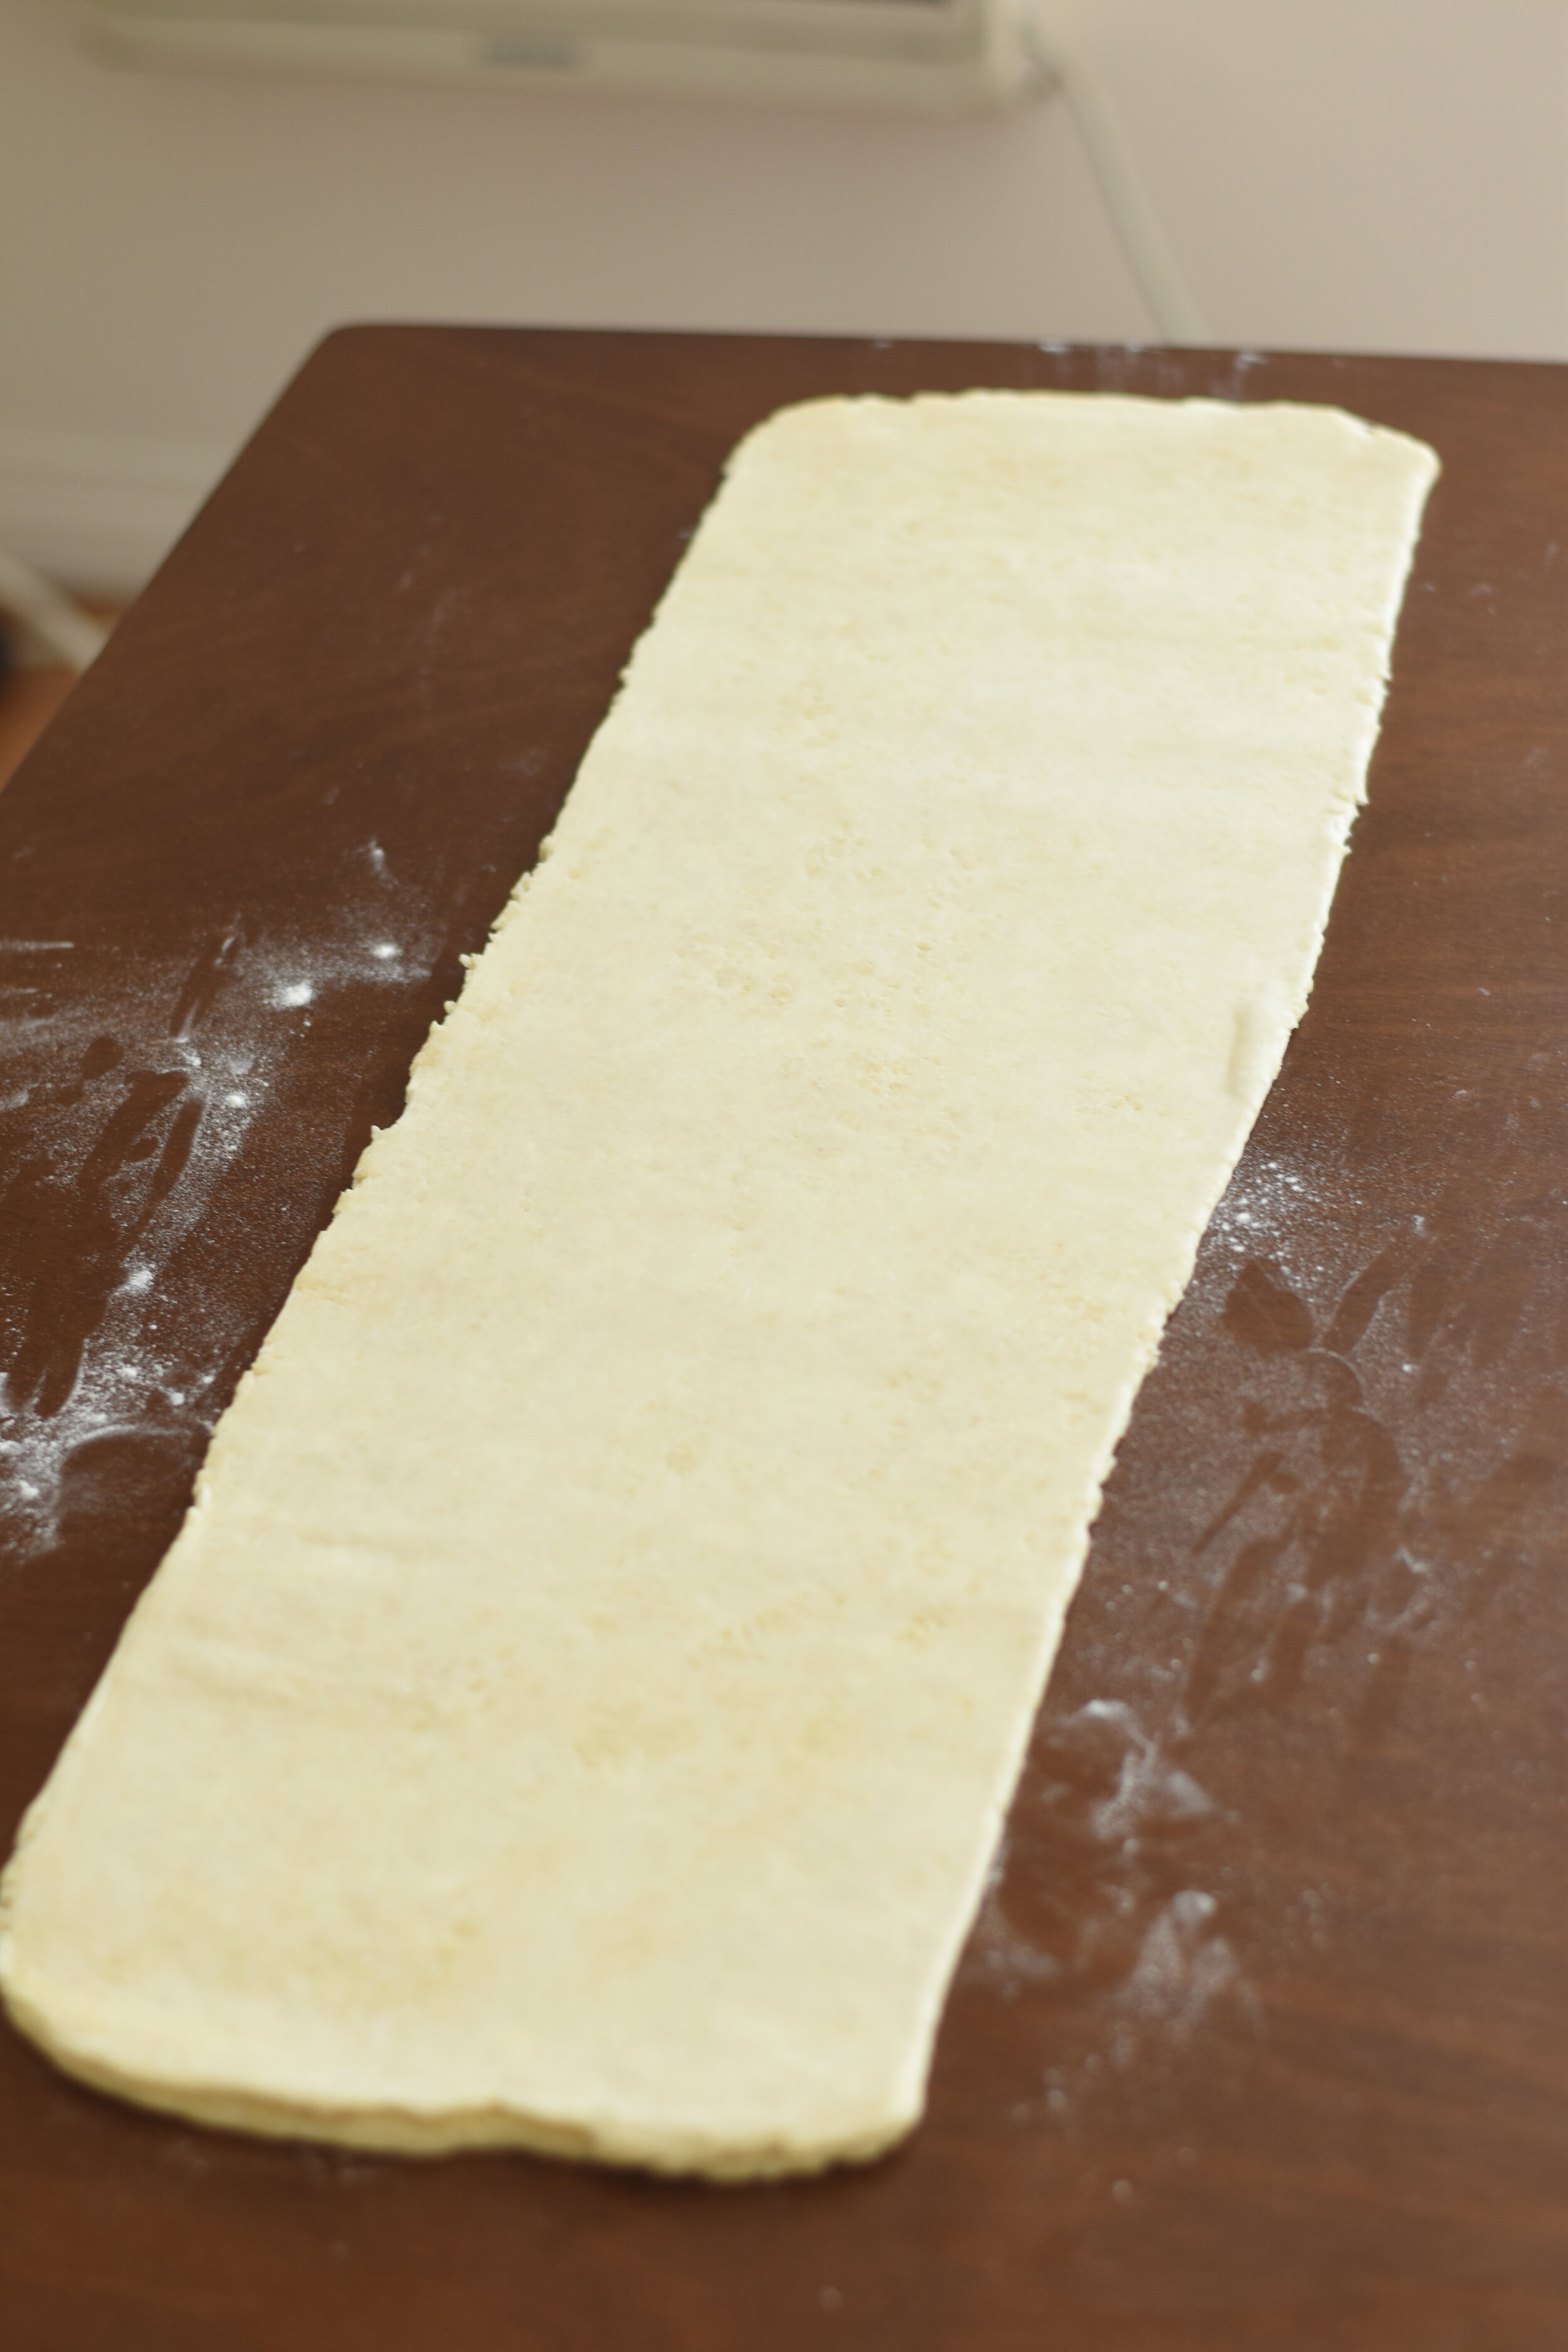  roll the dough package out to 4x its length 